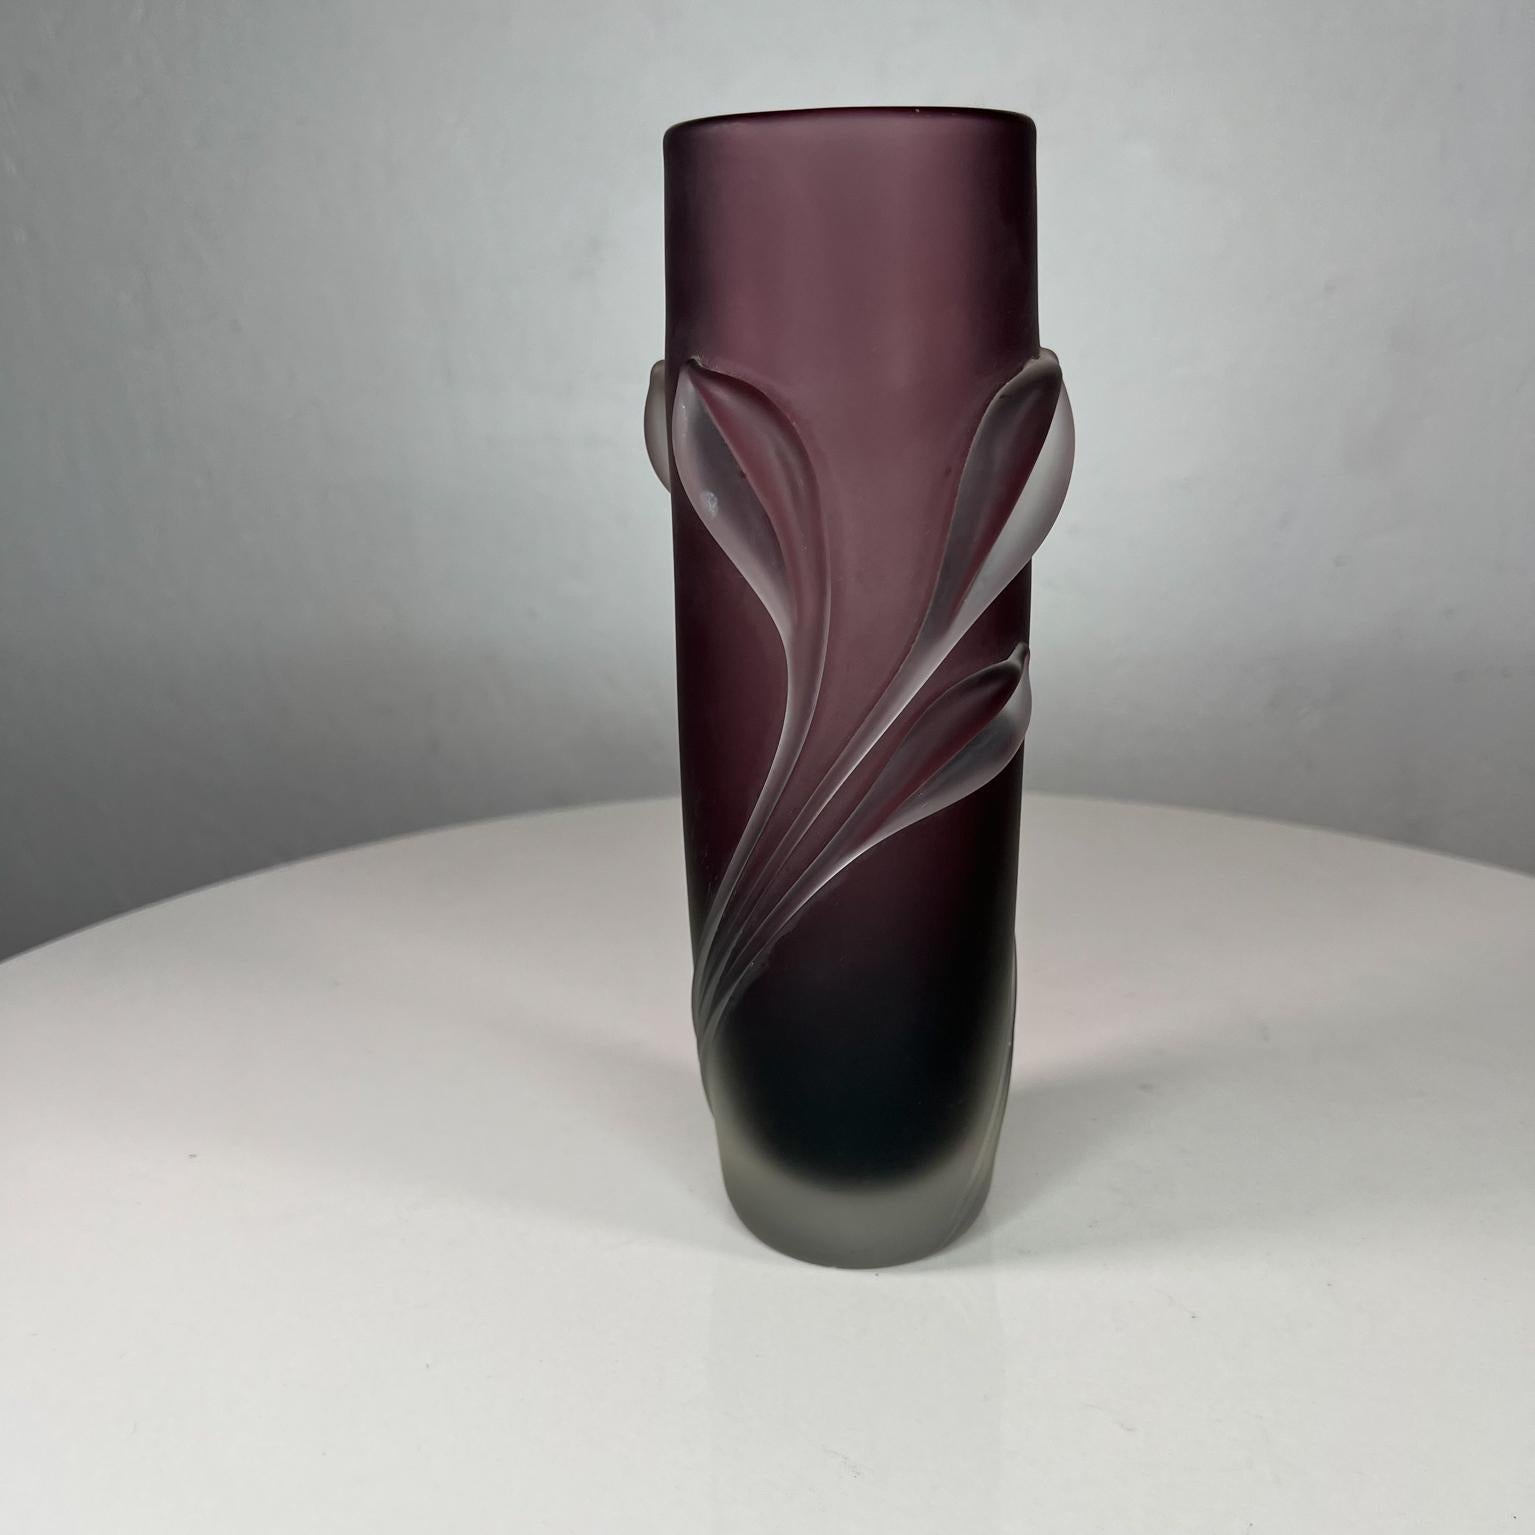 Late 20th Century 1980s Satin Sheen Frosted Art Glass Purple Vase by William Glasner New York